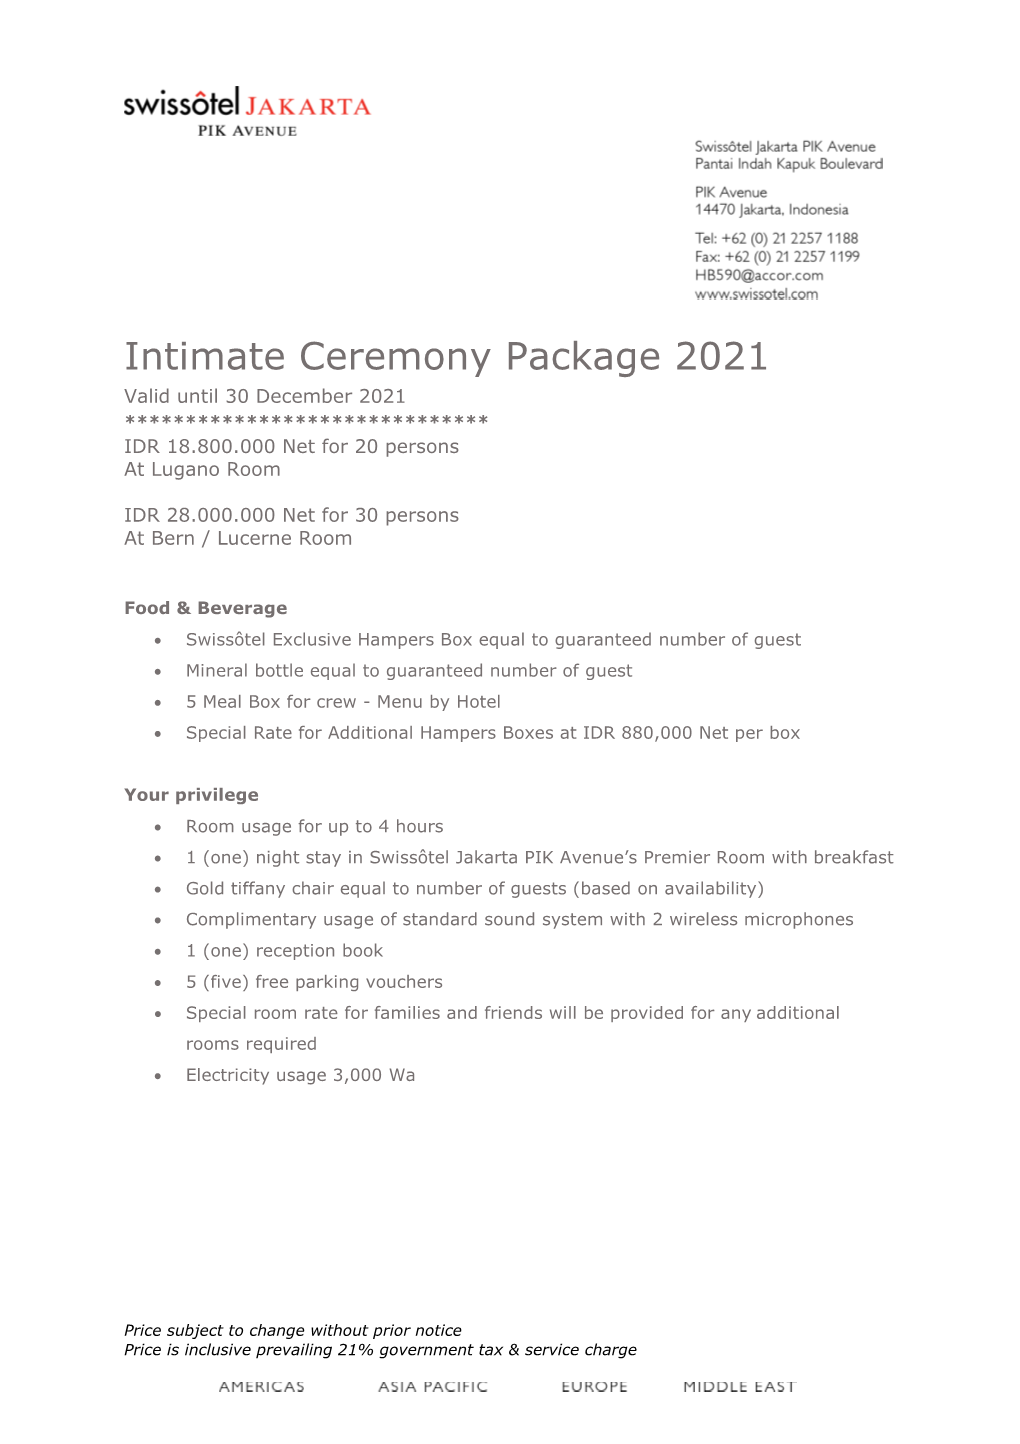 Intimate Ceremony Package 2021 Valid Until 30 December 2021 ****************************** IDR 18.800.000 Net for 20 Persons at Lugano Room